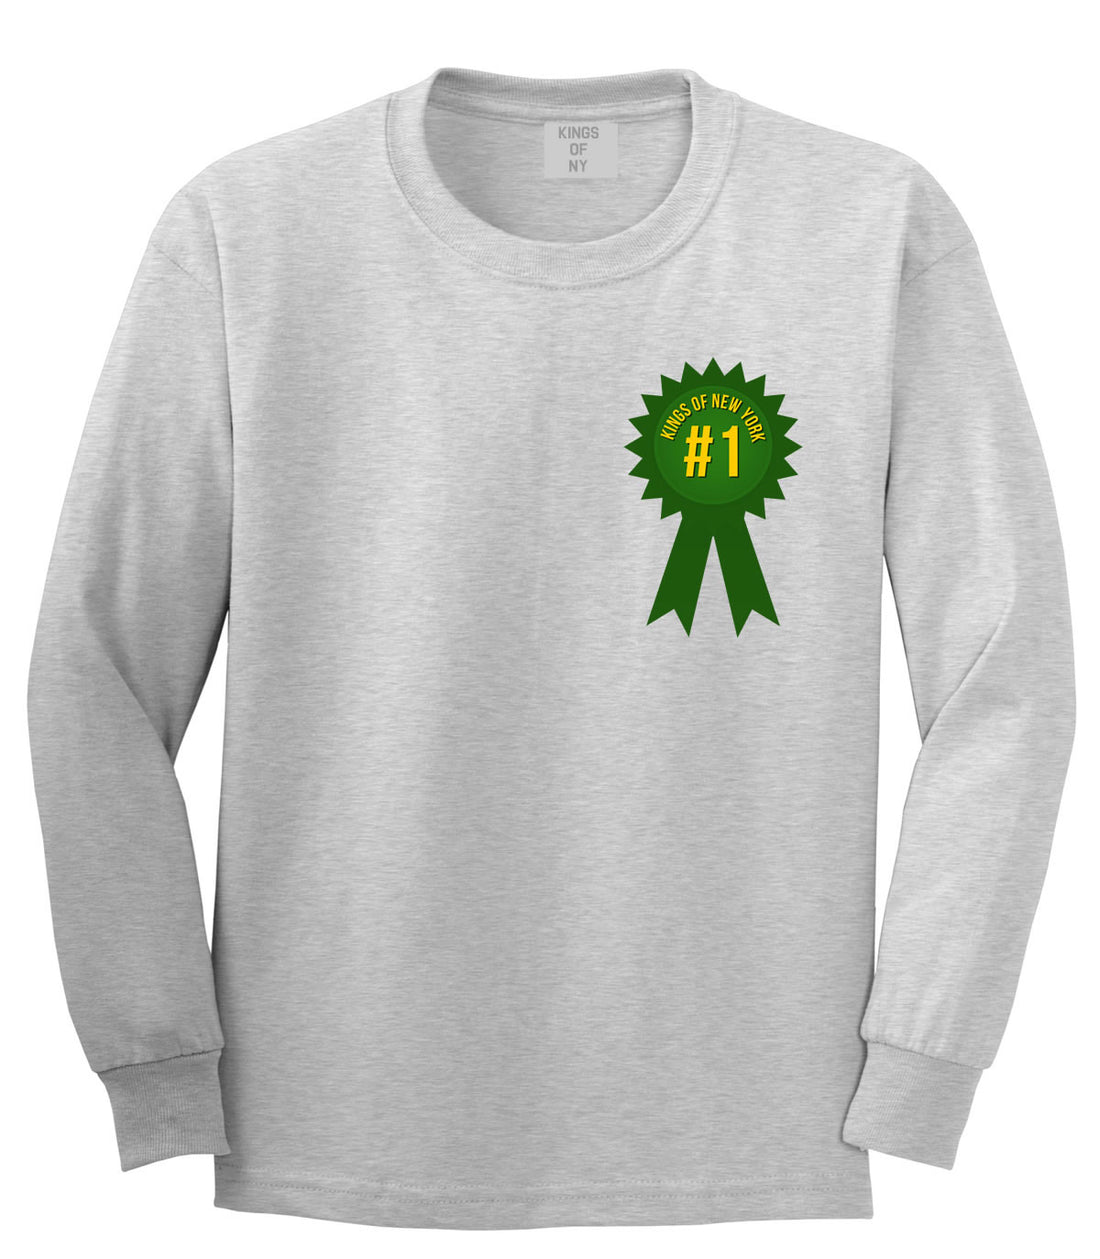 Grand Prize Champions Long Sleeve T-Shirt in Grey